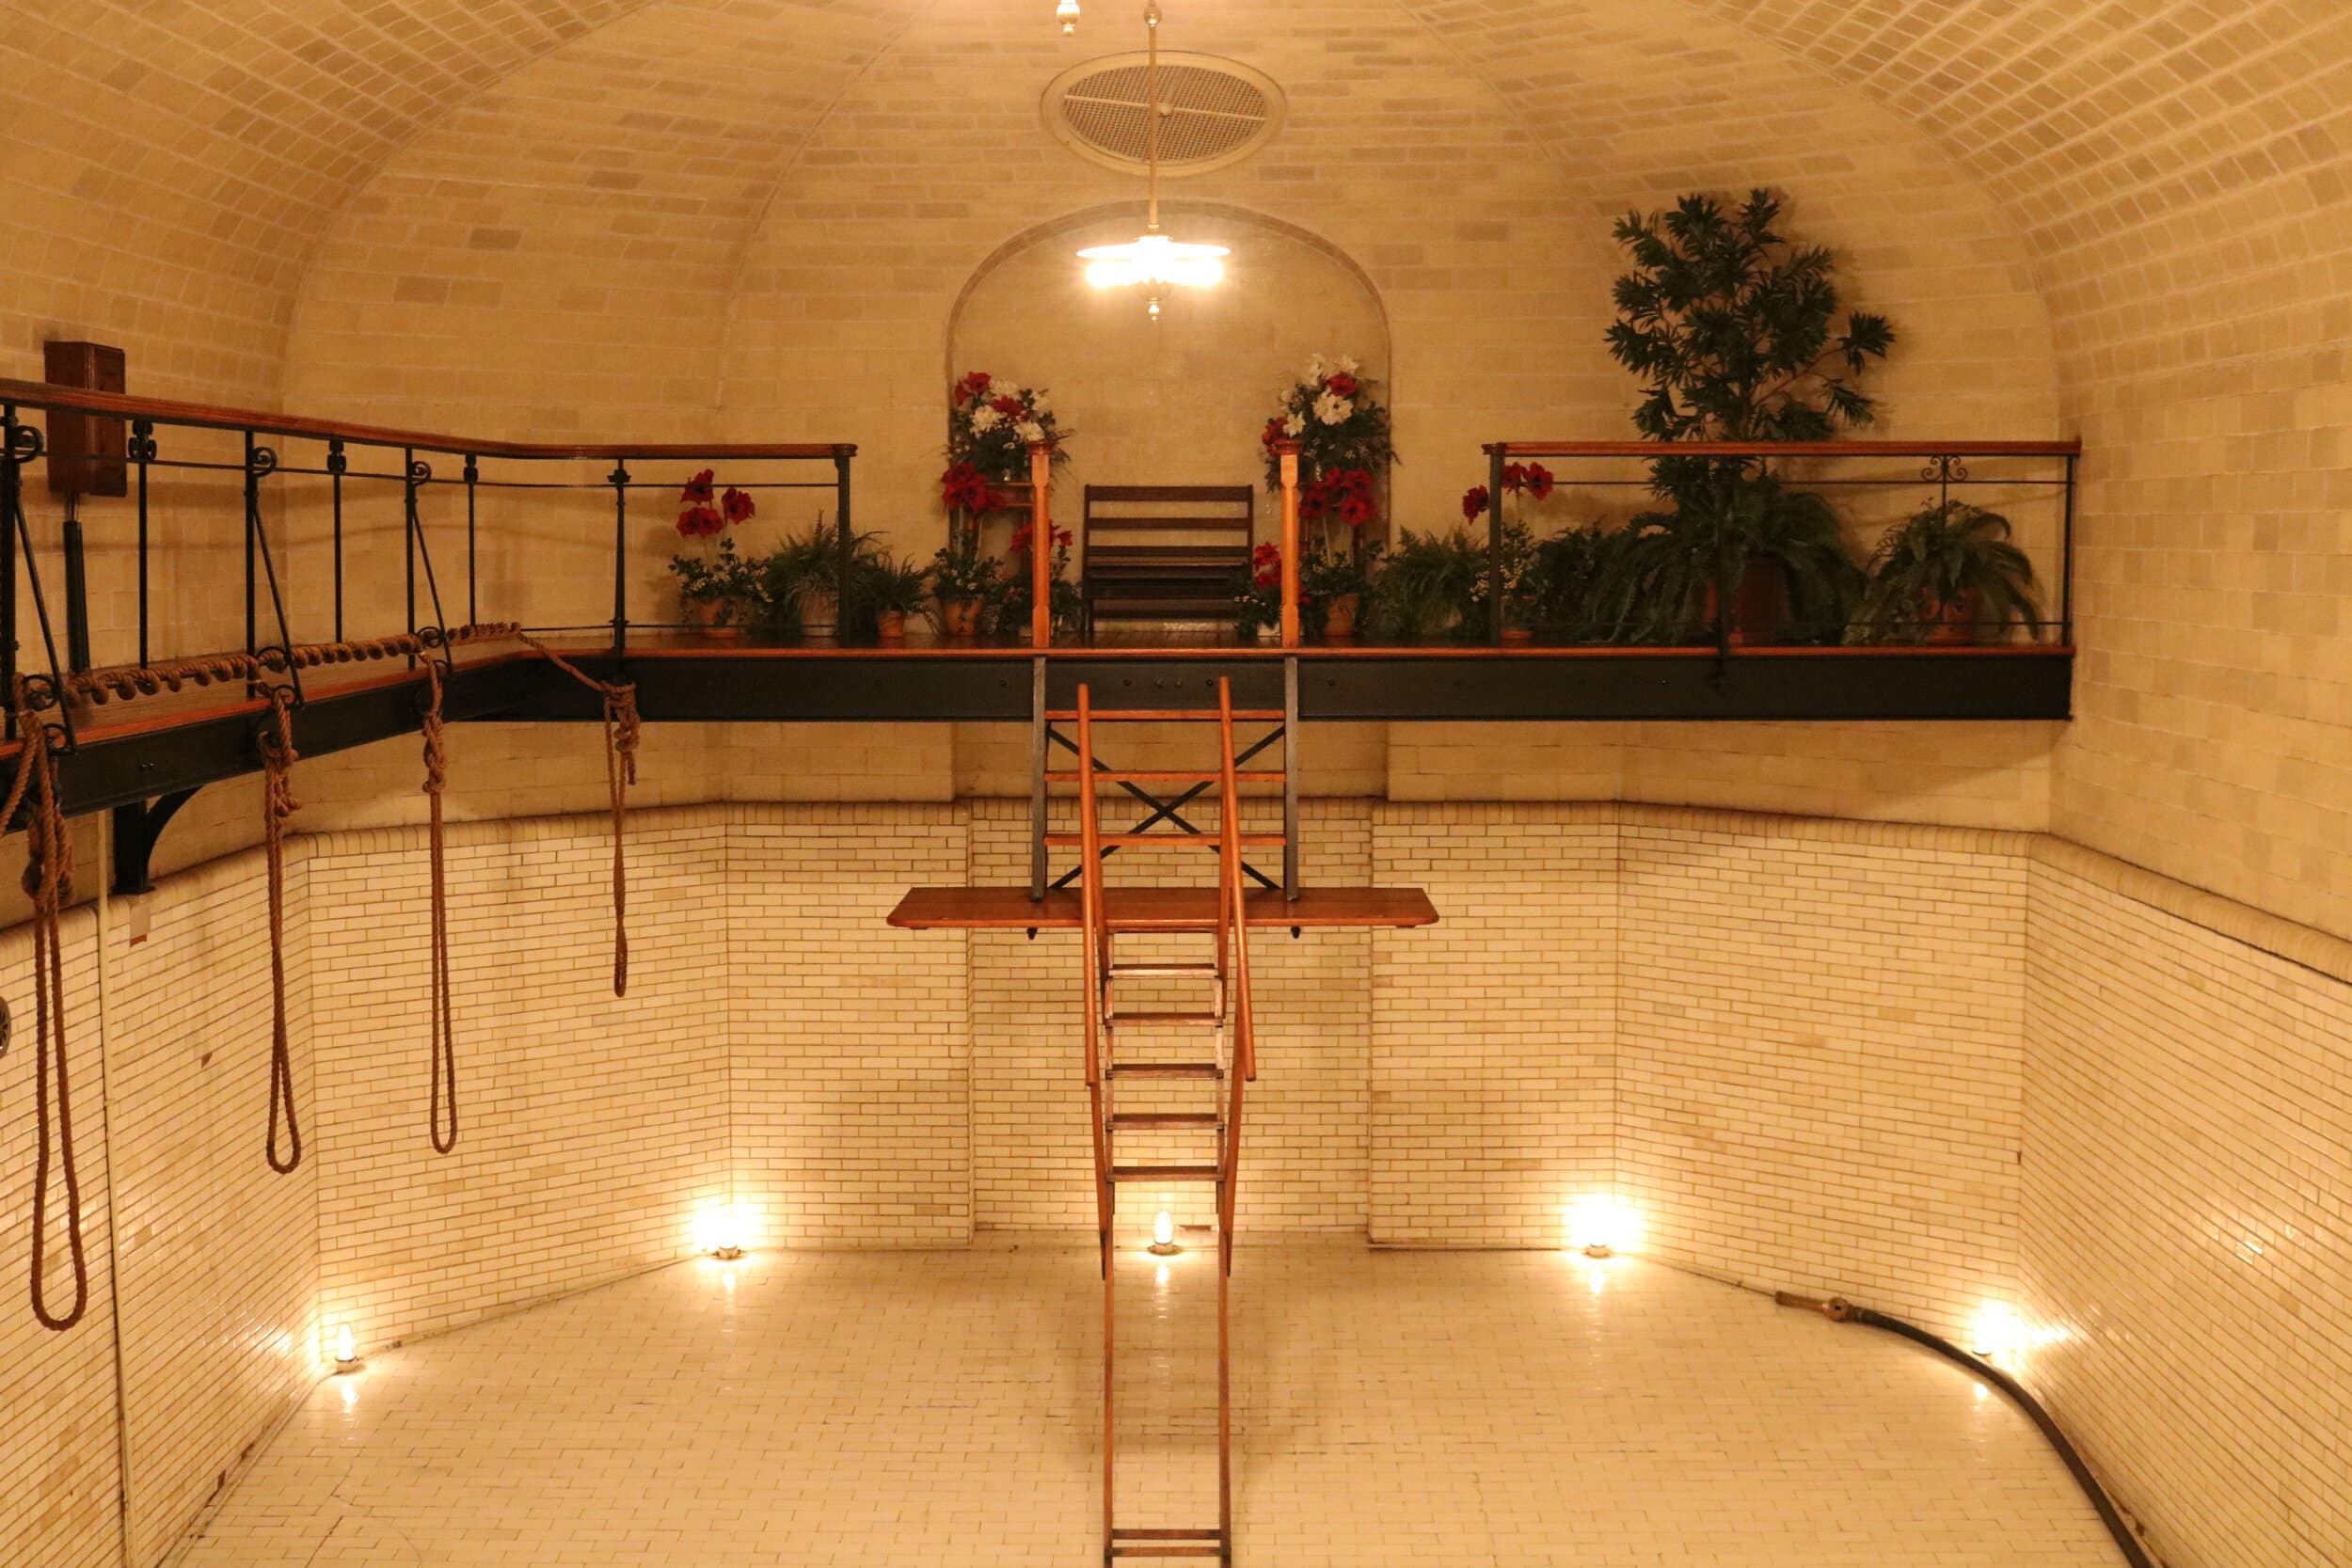 The 70,000 gallon, heated, indoor swimming pool. The pool still has all of the original lighting from the inside of the pool.